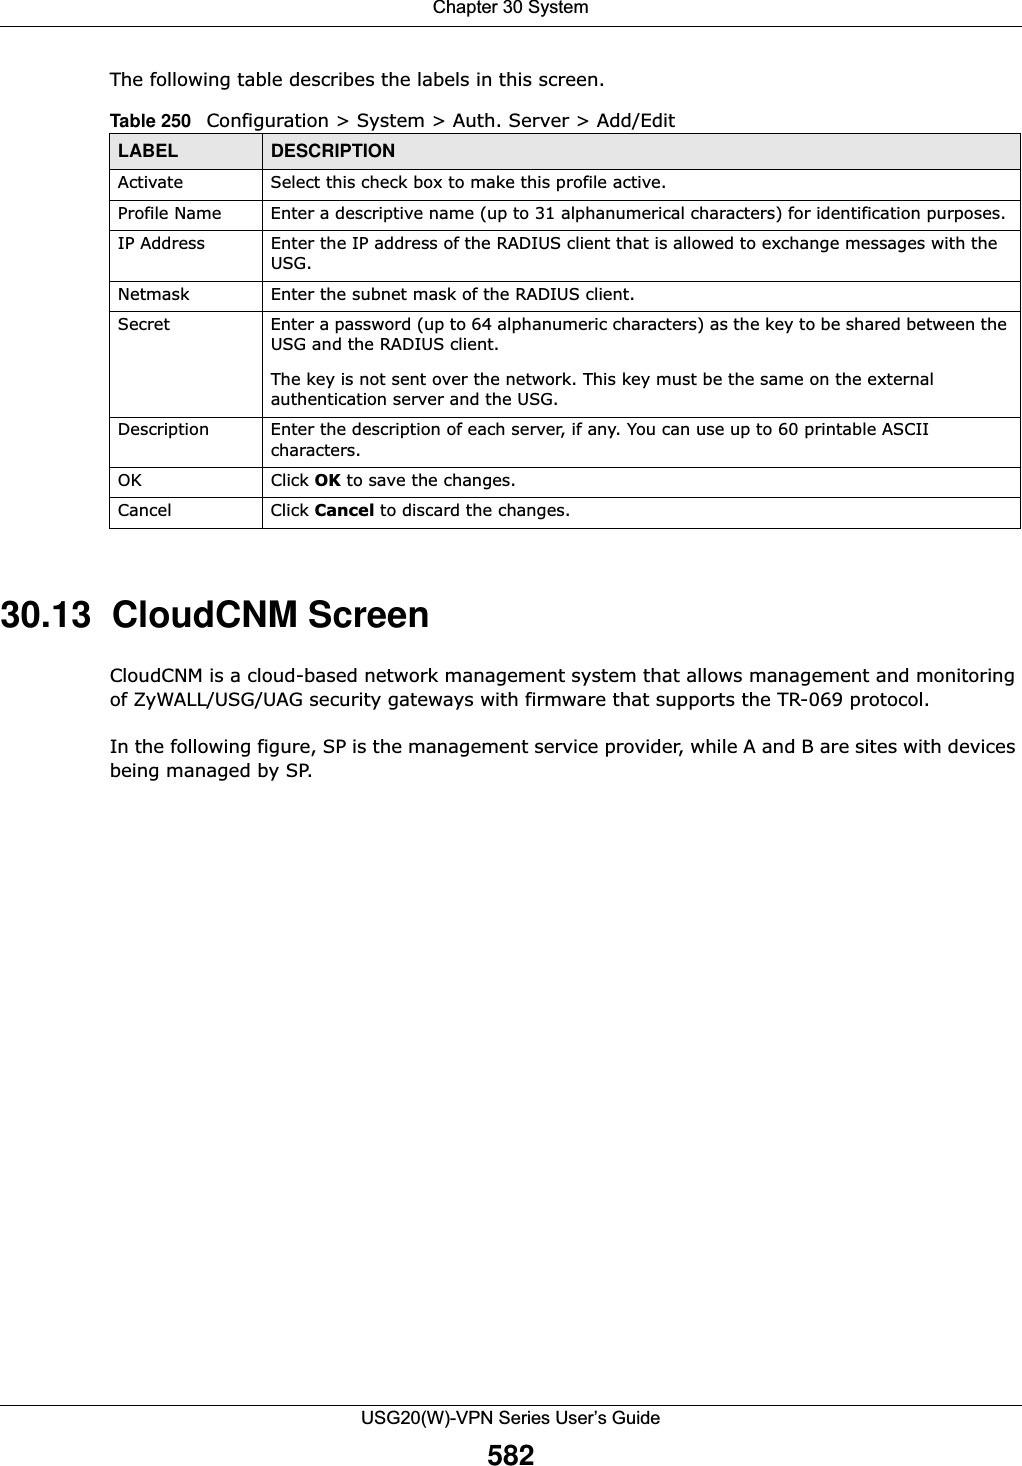 Chapter 30 SystemUSG20(W)-VPN Series User’s Guide582The following table describes the labels in this screen.  30.13  CloudCNM ScreenCloudCNM is a cloud-based network management system that allows management and monitoring of ZyWALL/USG/UAG security gateways with firmware that supports the TR-069 protocol.In the following figure, SP is the management service provider, while A and B are sites with devices being managed by SP.Table 250   Configuration &gt; System &gt; Auth. Server &gt; Add/EditLABEL DESCRIPTIONActivate Select this check box to make this profile active.Profile Name Enter a descriptive name (up to 31 alphanumerical characters) for identification purposes. IP Address Enter the IP address of the RADIUS client that is allowed to exchange messages with the USG.Netmask Enter the subnet mask of the RADIUS client.Secret Enter a password (up to 64 alphanumeric characters) as the key to be shared between the USG and the RADIUS client. The key is not sent over the network. This key must be the same on the external authentication server and the USG. Description Enter the description of each server, if any. You can use up to 60 printable ASCII characters.OK Click OK to save the changes. Cancel Click Cancel to discard the changes. 